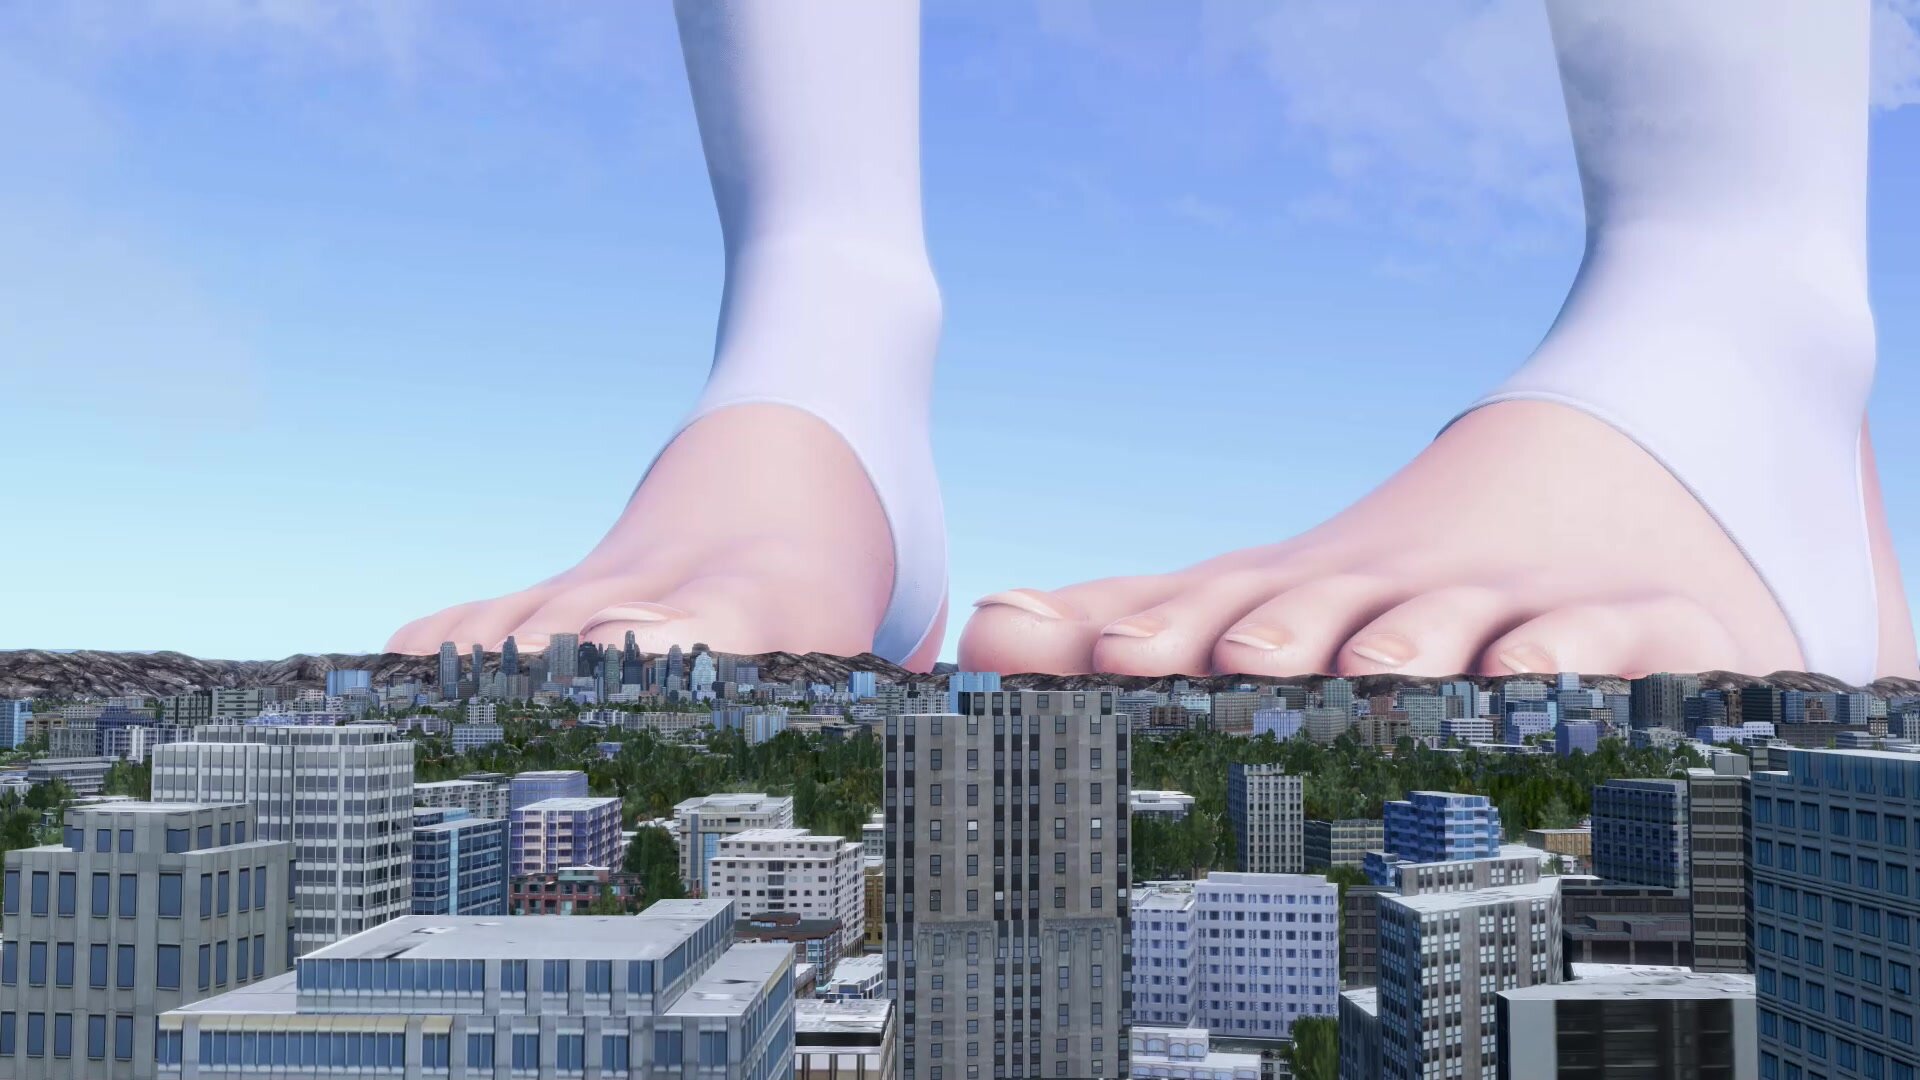 Giant sisters trampling a city